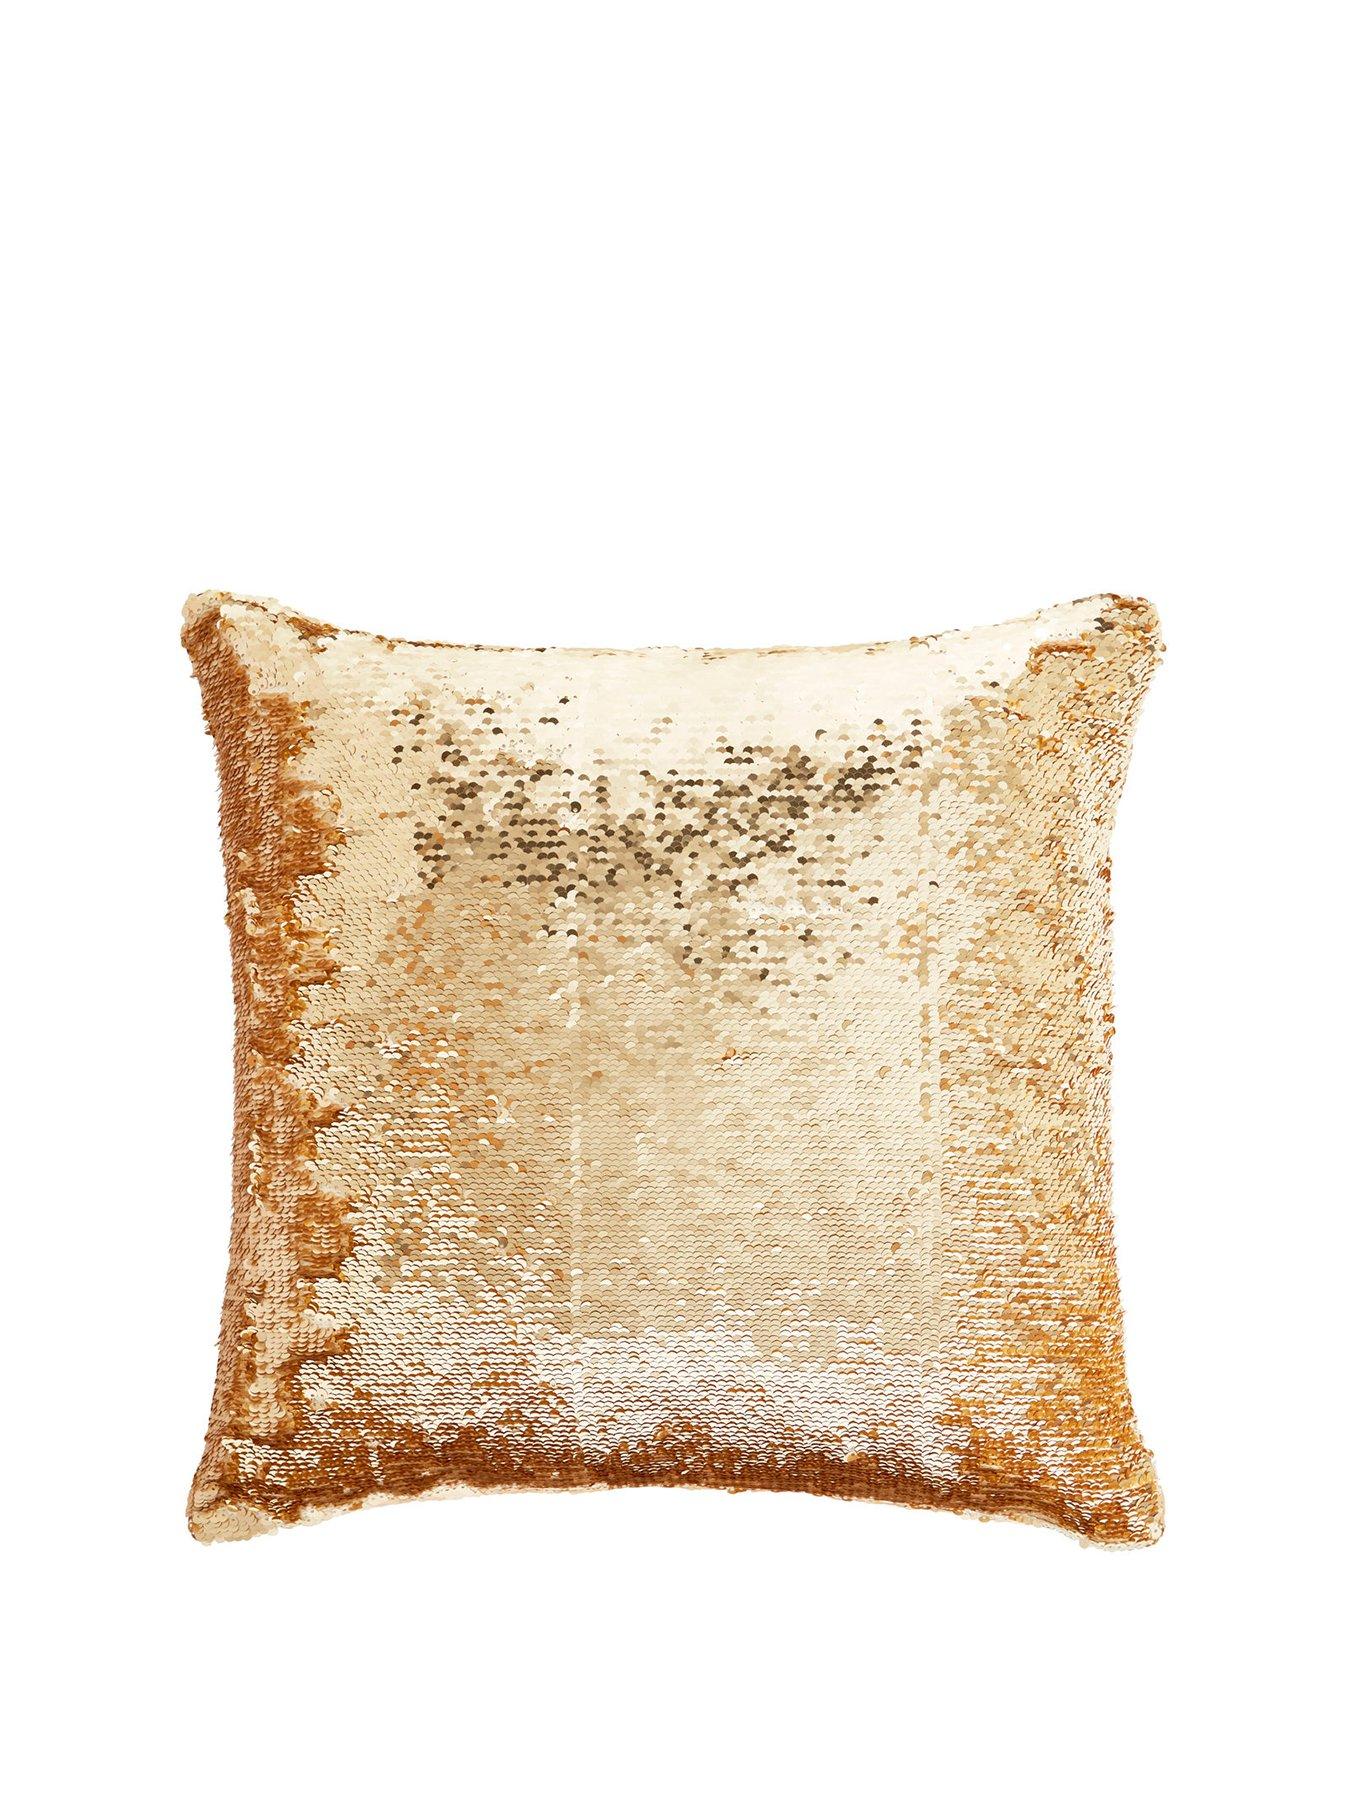 Tess Daly Sequin Gold Cushion | very.co.uk